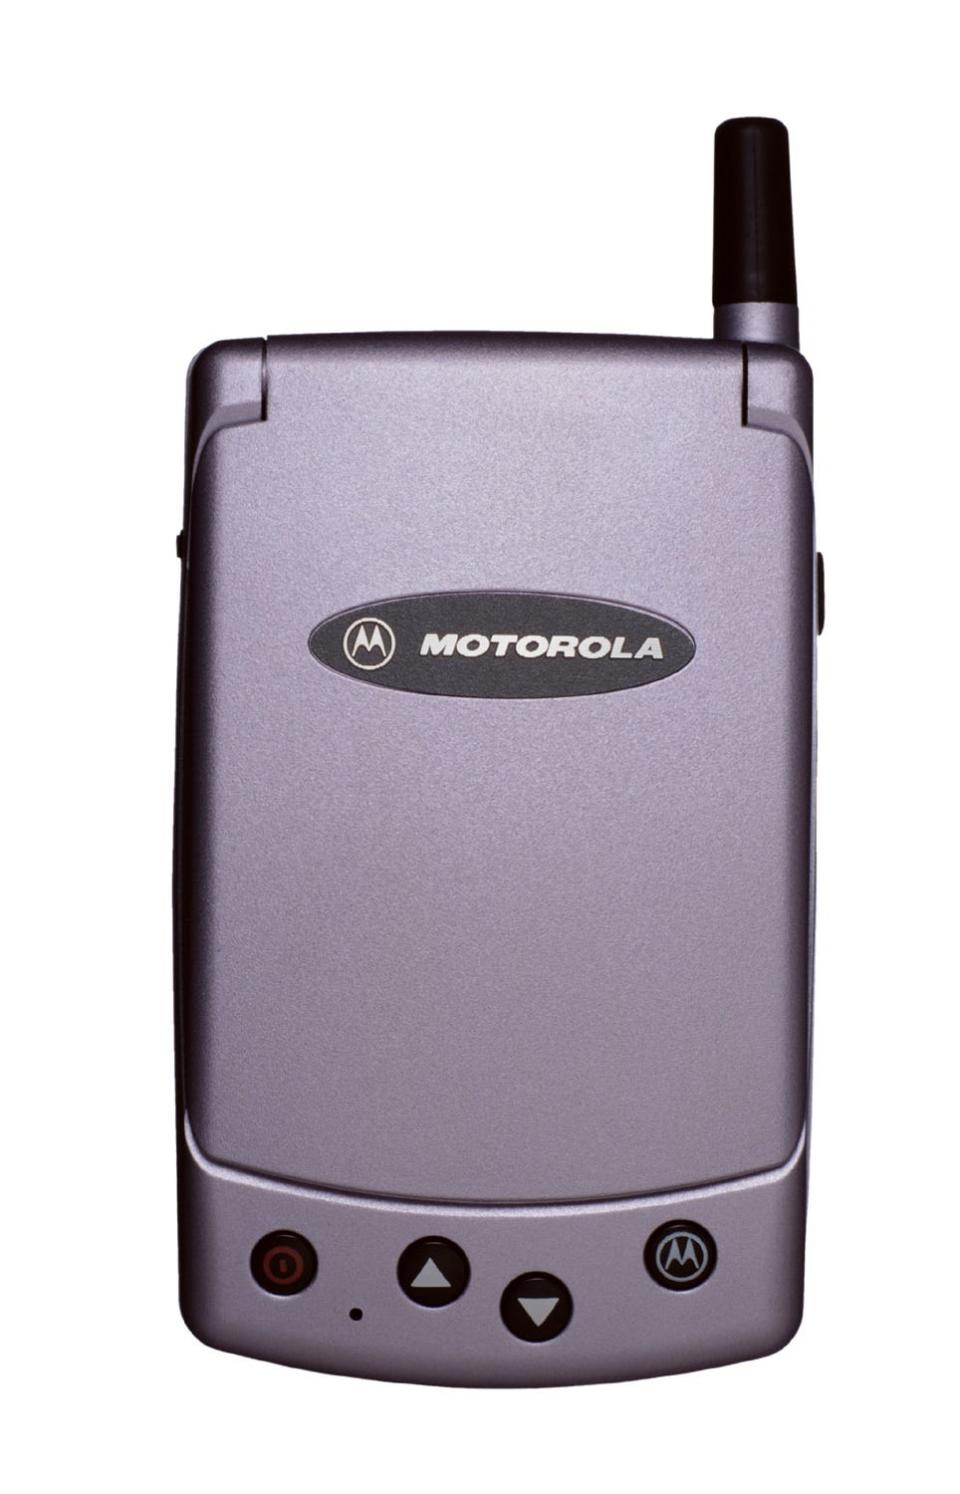 closed motorola accompli A6188 with an antenna, four buttons at the bottom